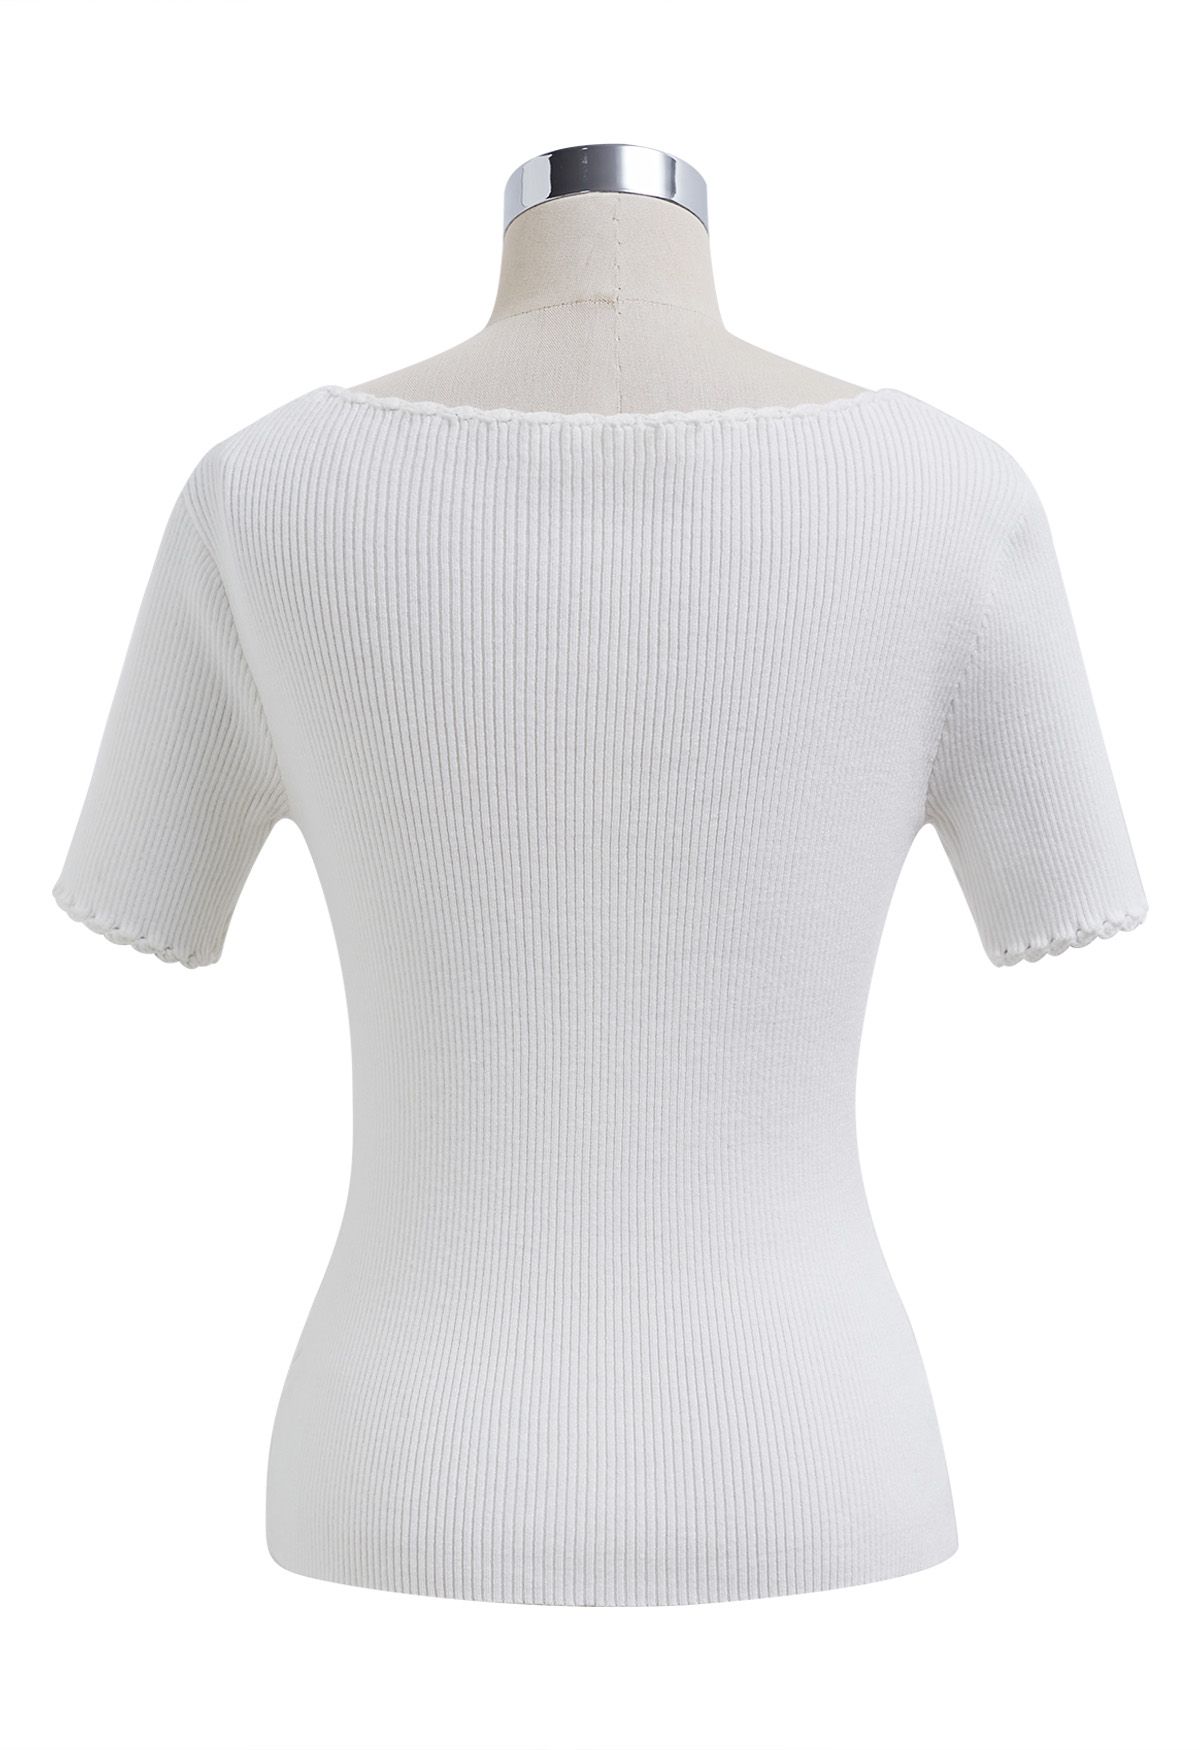 Scalloped Edge Square Neck Short Sleeve Knit Top in White